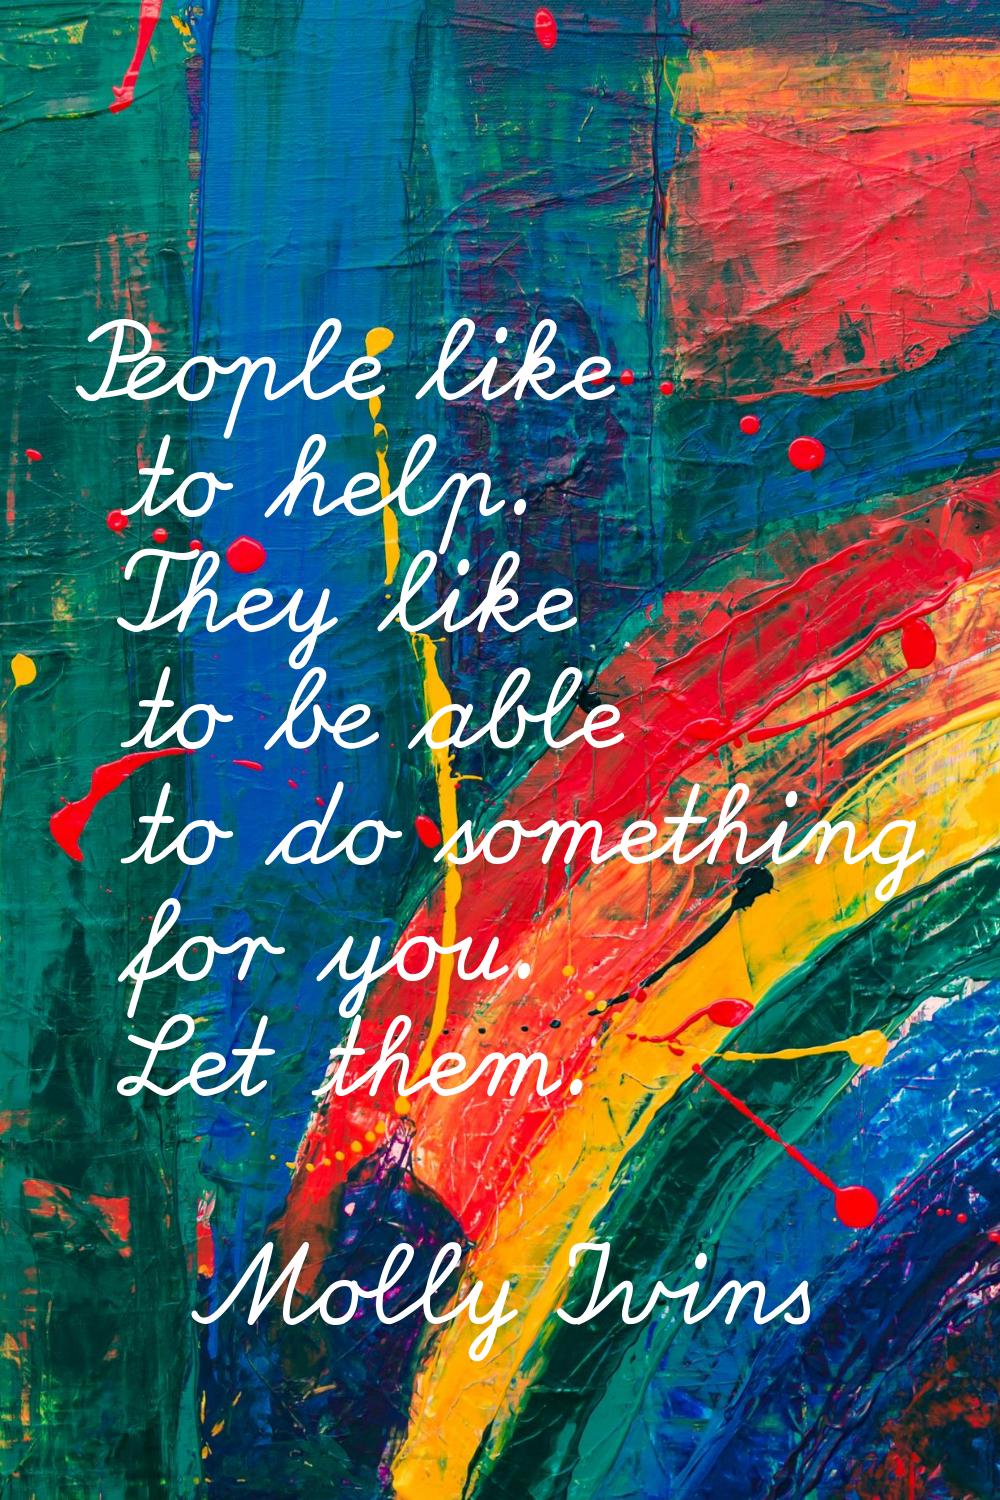 People like to help. They like to be able to do something for you. Let them.